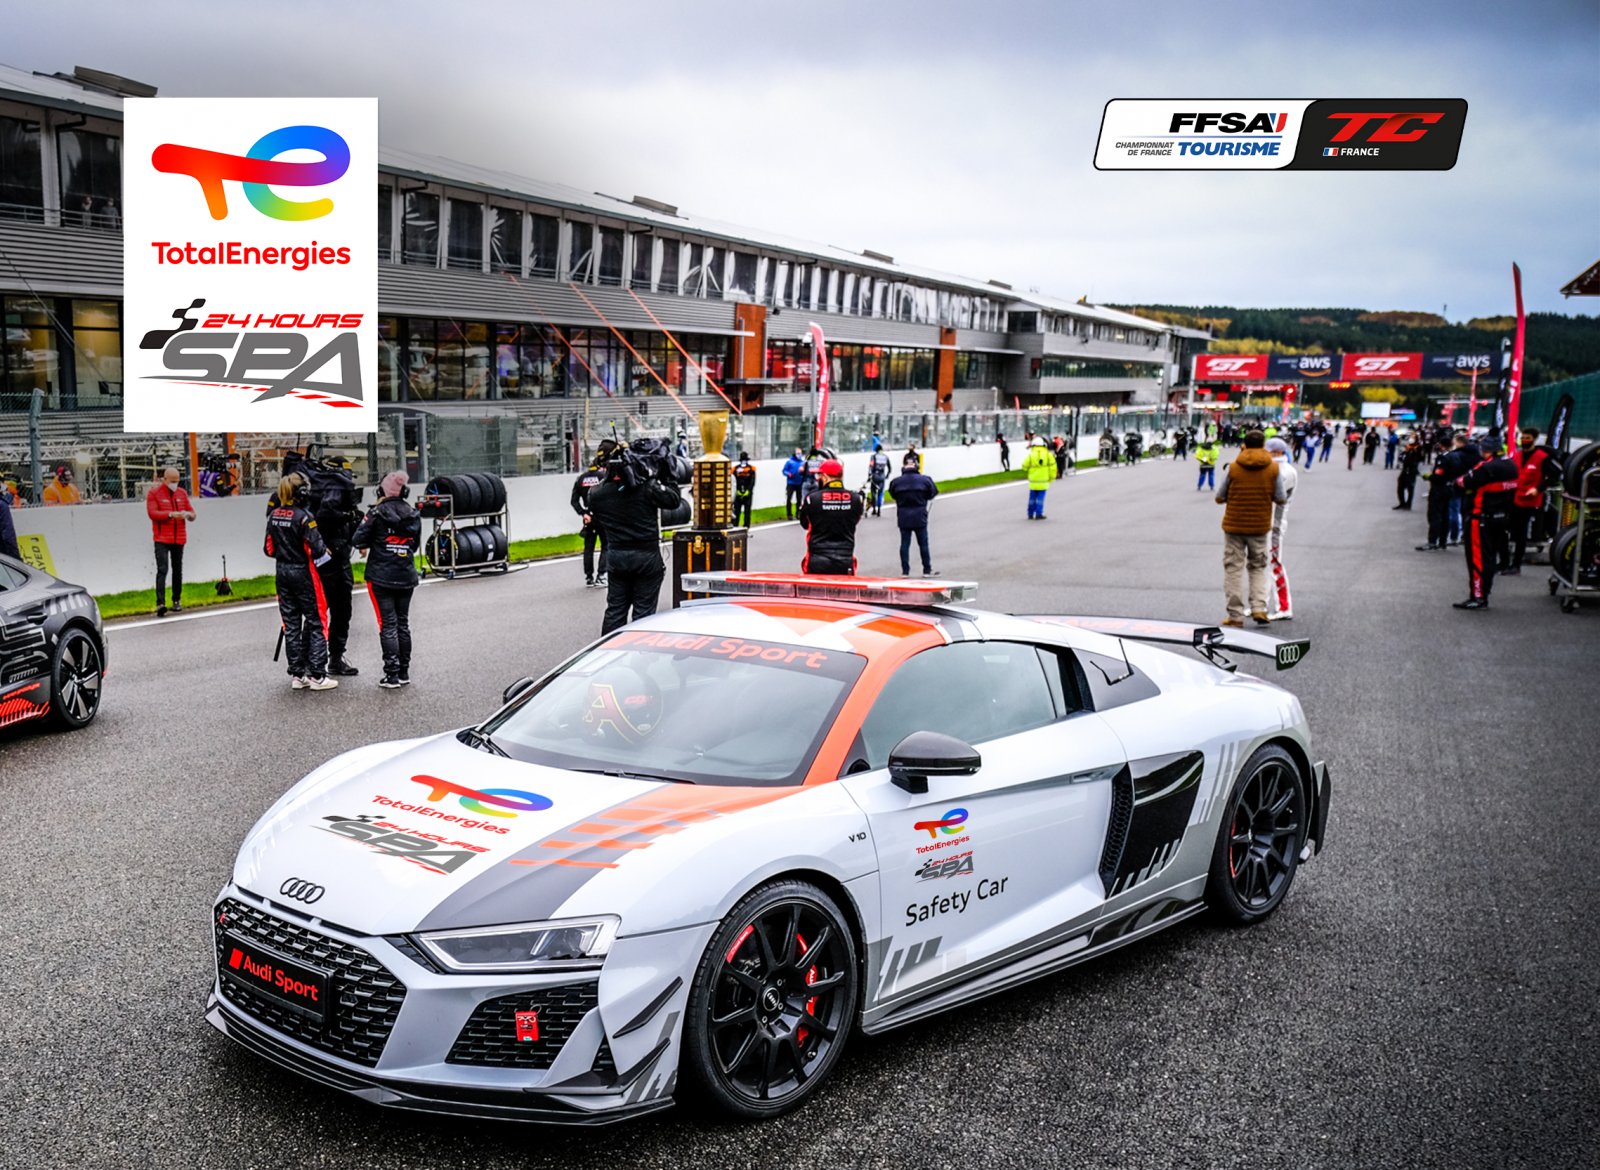 Kévin Ropars, pilote de Safety Car aux TotalEnergies 24 Hours of Spa